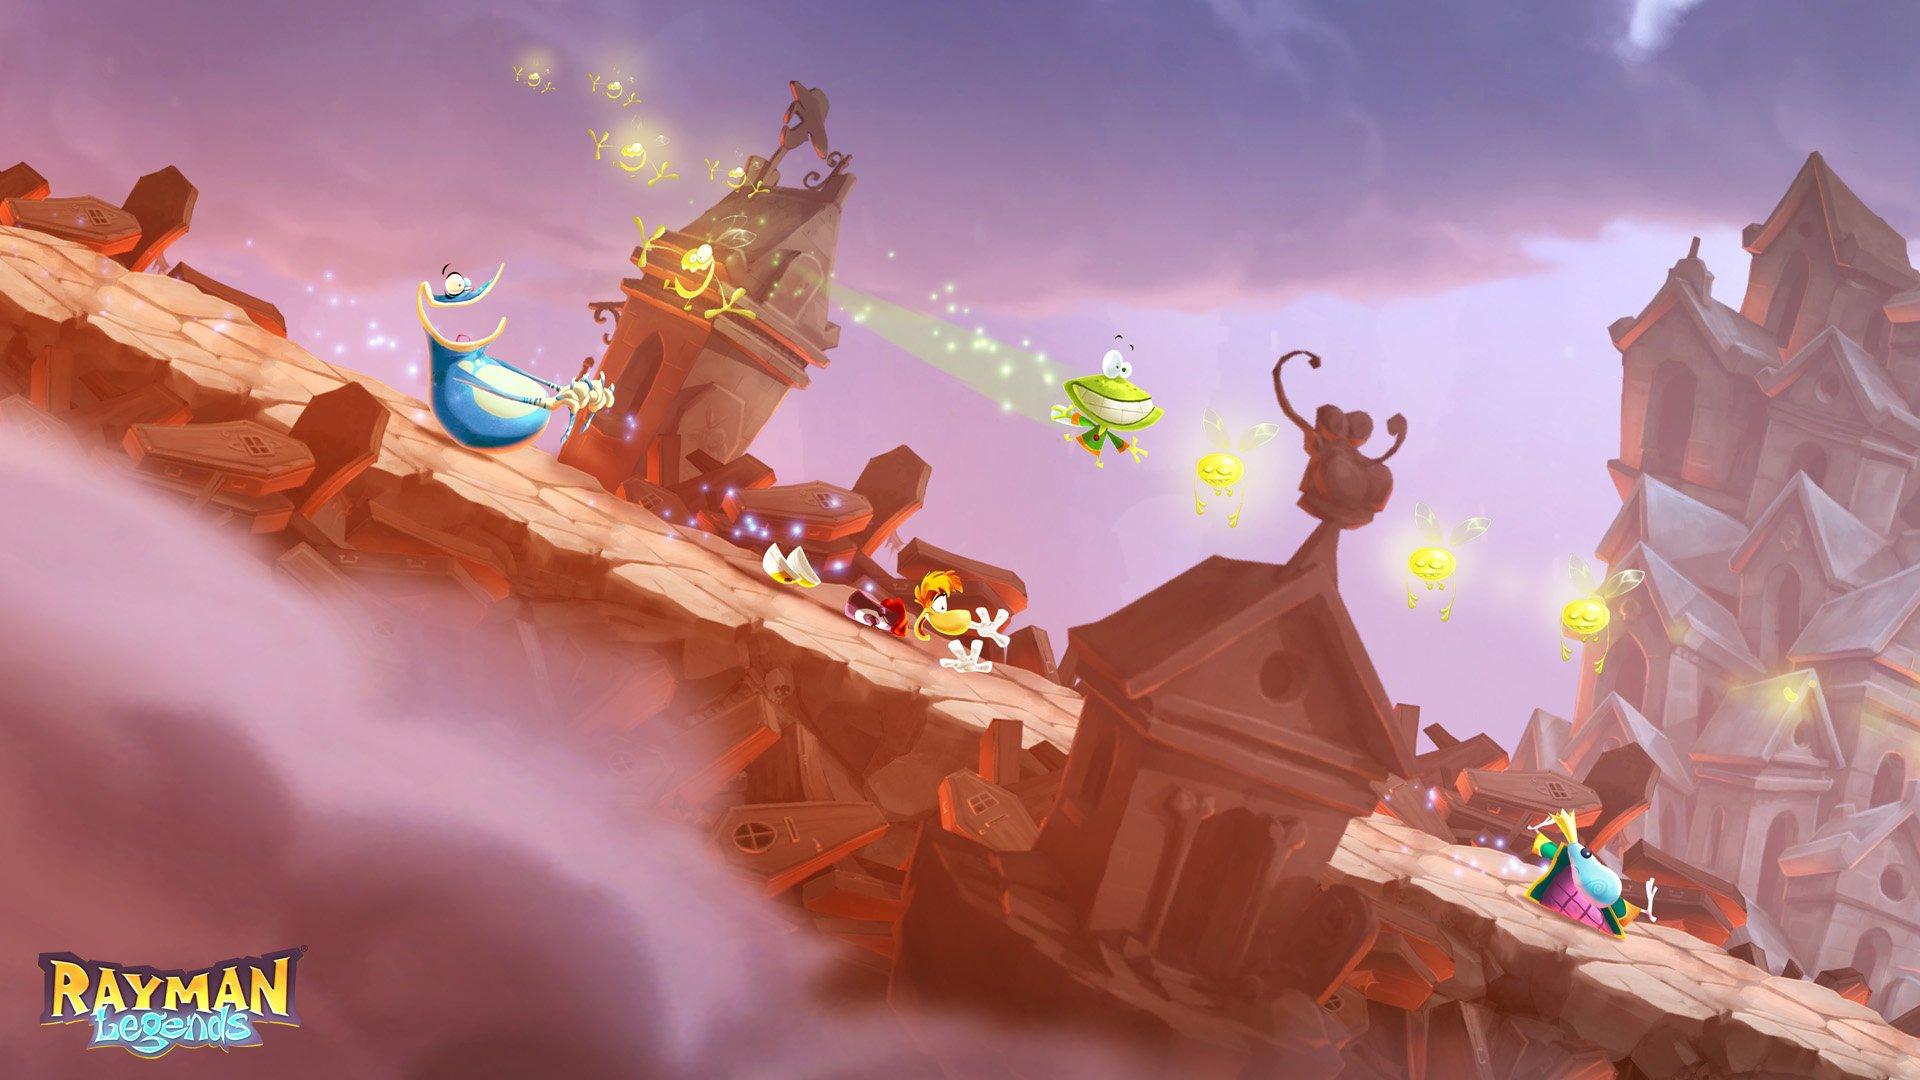 Demo of Rayman Legends for PS3, Xbox 360 for the 14th August - Movies Games  and Tech